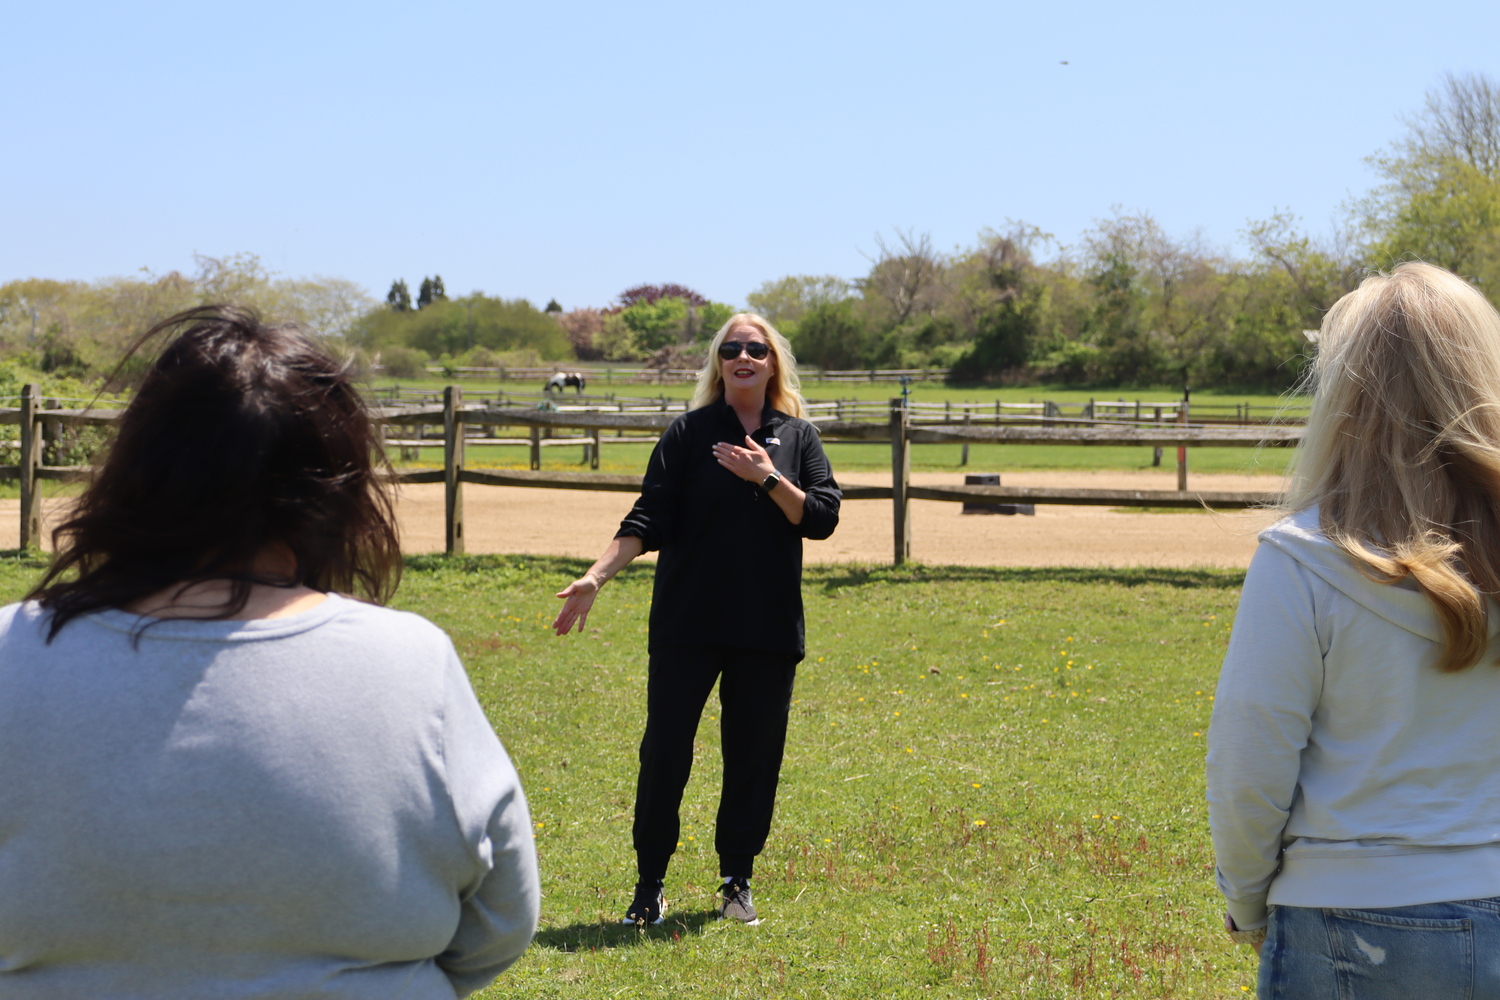 Tracie Sullivan, a cancer exercise specialist with Stony Brook Southampton Hospital, leads the women through a series of movements to warm up before they being grooming the horses. CAILIN RILEY